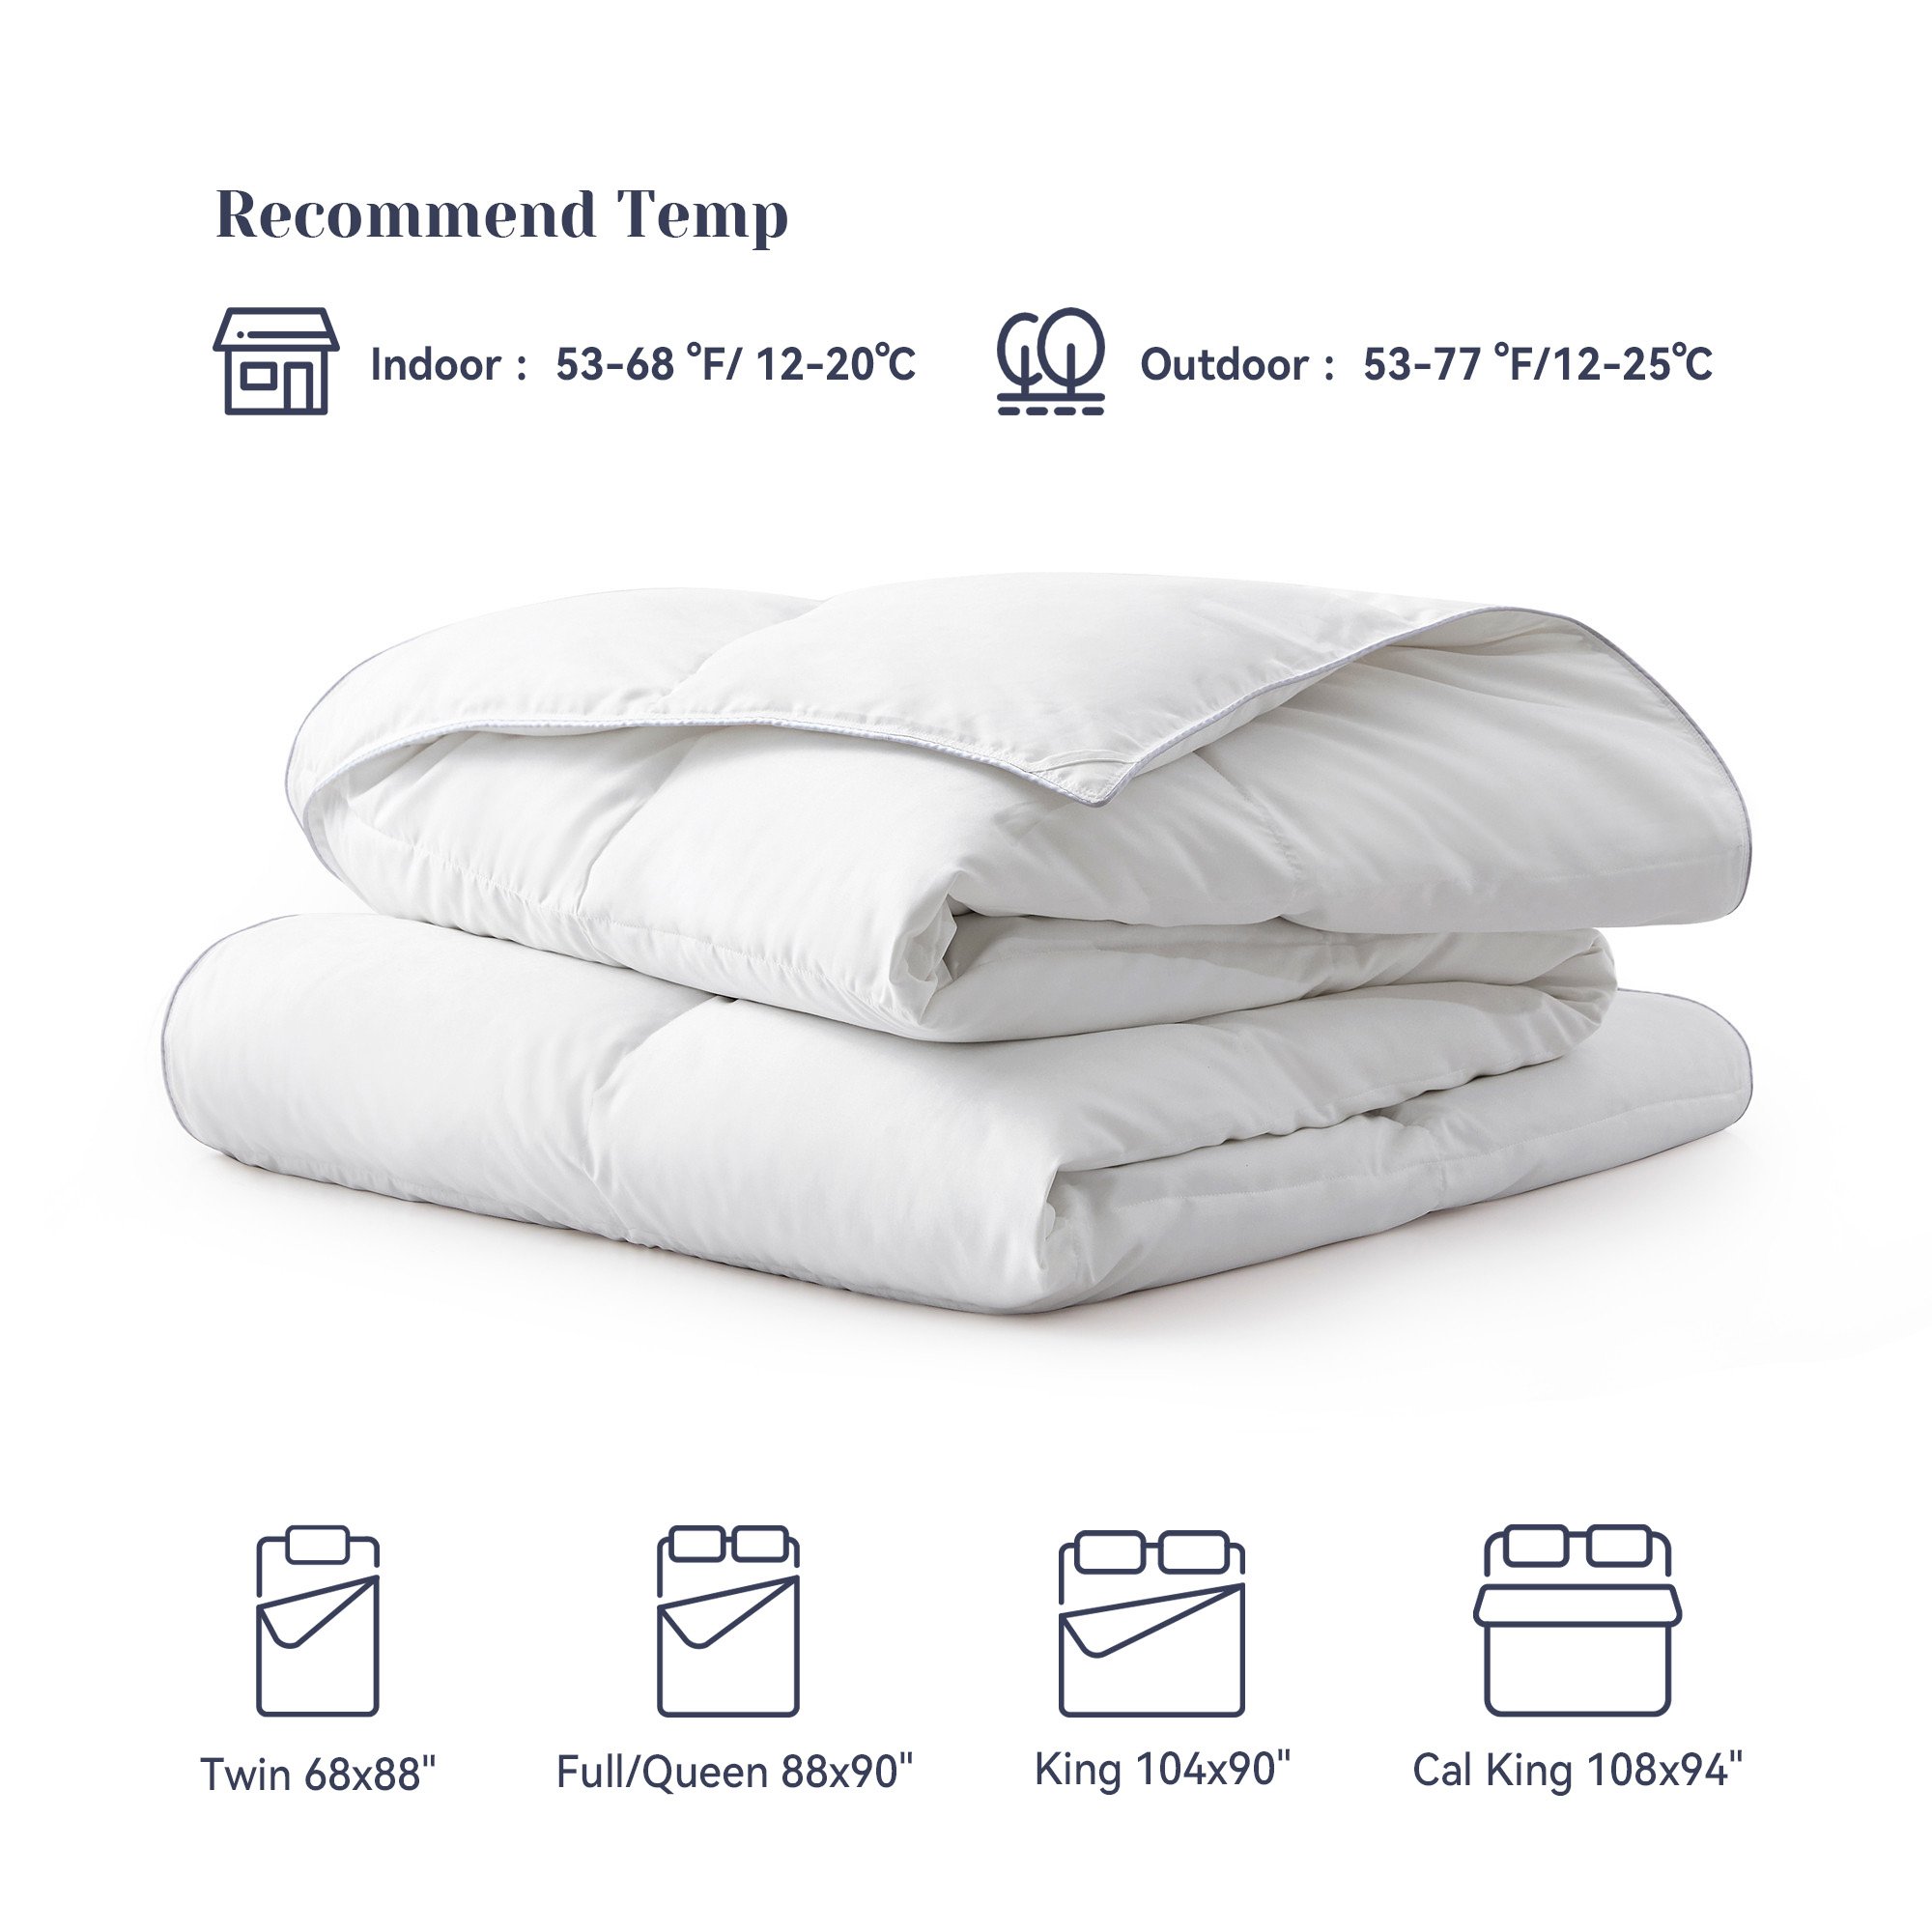 Ultimate Comfort Lightweight Comforter With White Goose Feather Fiber And White Goose Down, White, Full Queen Size